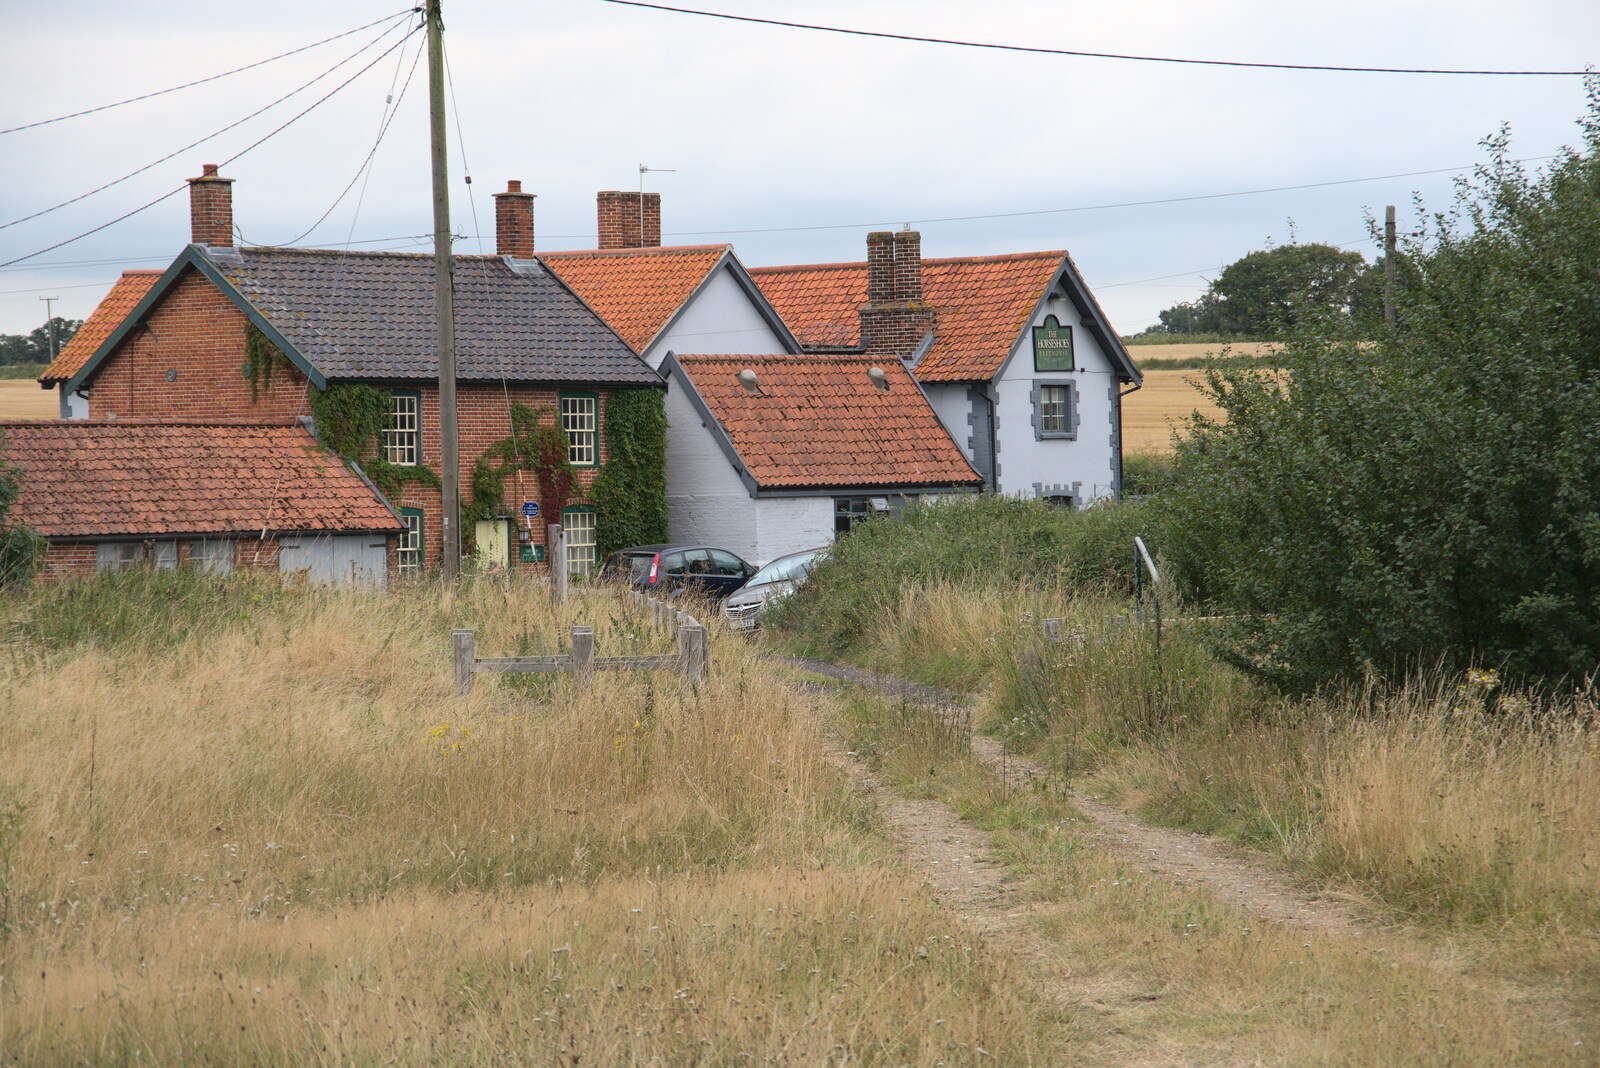 The Horseshoes pub and the old post office from An Open Day at the Windmill, Billingford, Norfolk - 21st August 2021